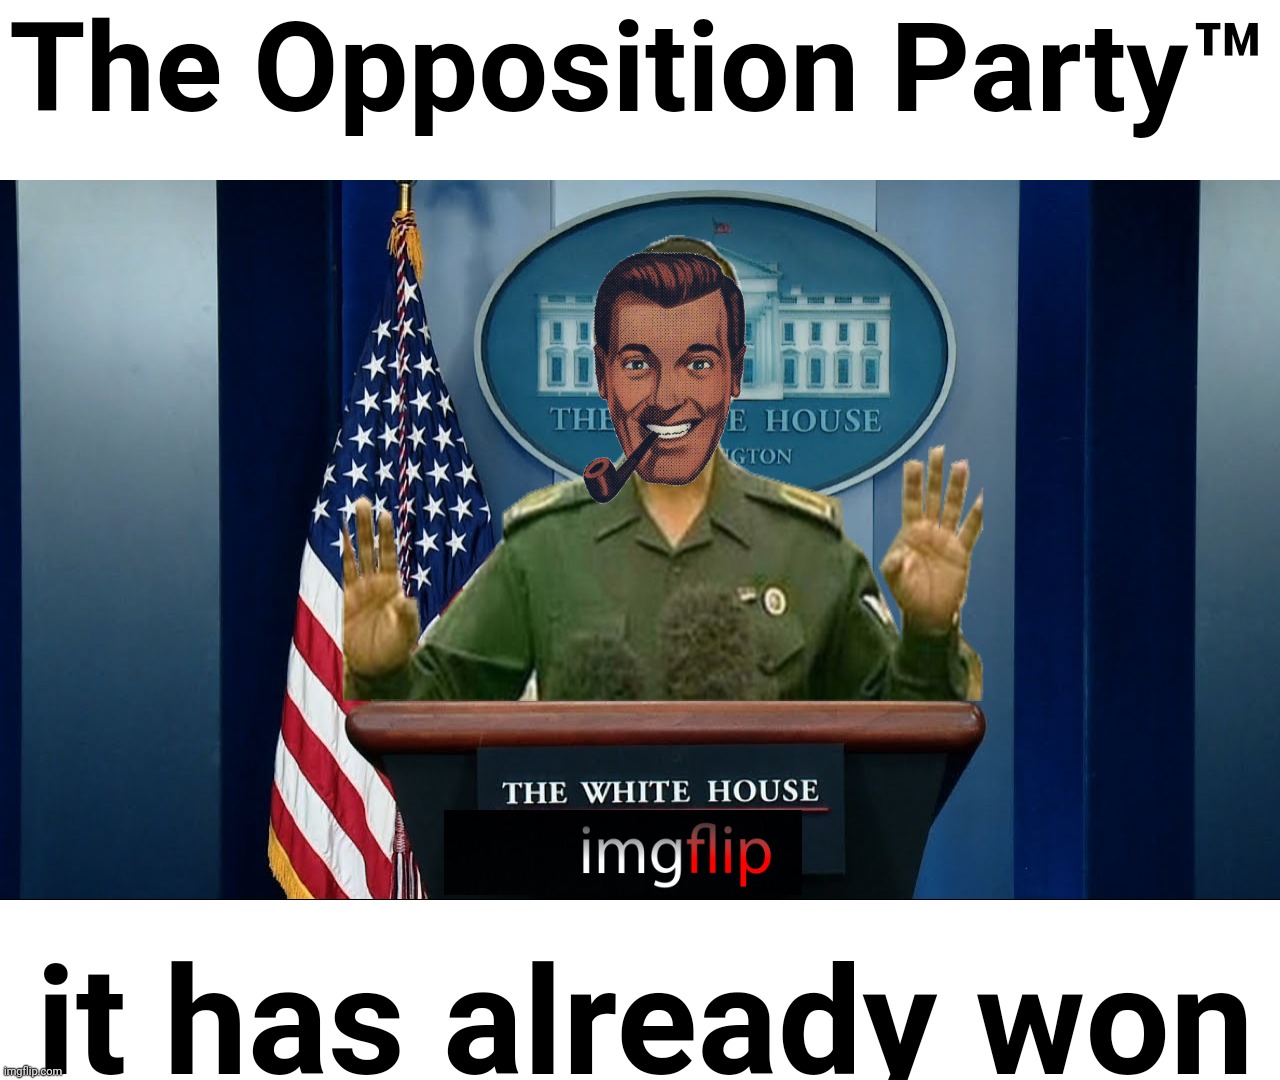 comical ali white house | The Opposition Party™ it has already won | image tagged in comical ali white house | made w/ Imgflip meme maker